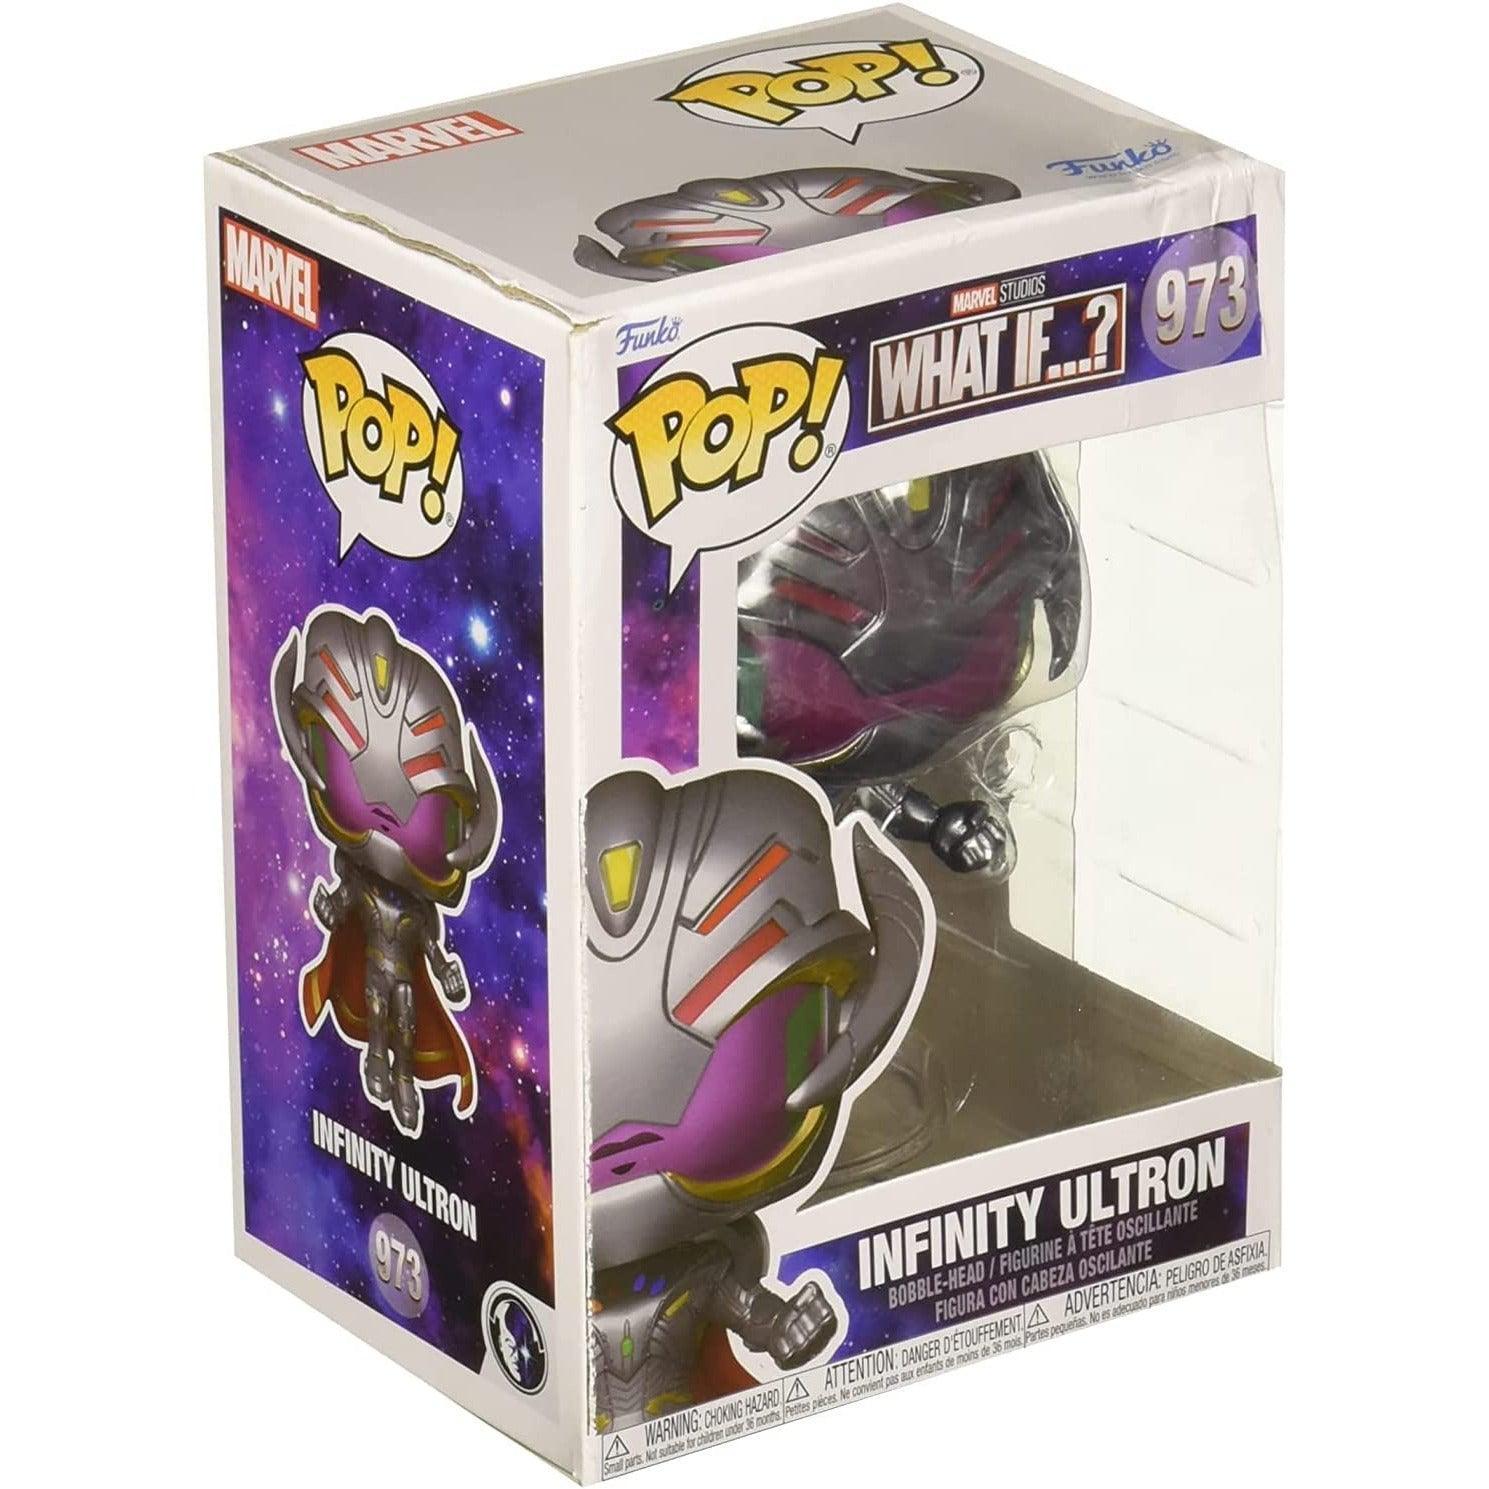 Funko Pop Marvel: What If? - Infinity Ultron - BumbleToys - 18+, Action Figures, Boys, Characters, Funko, Marvel, Pre-Order